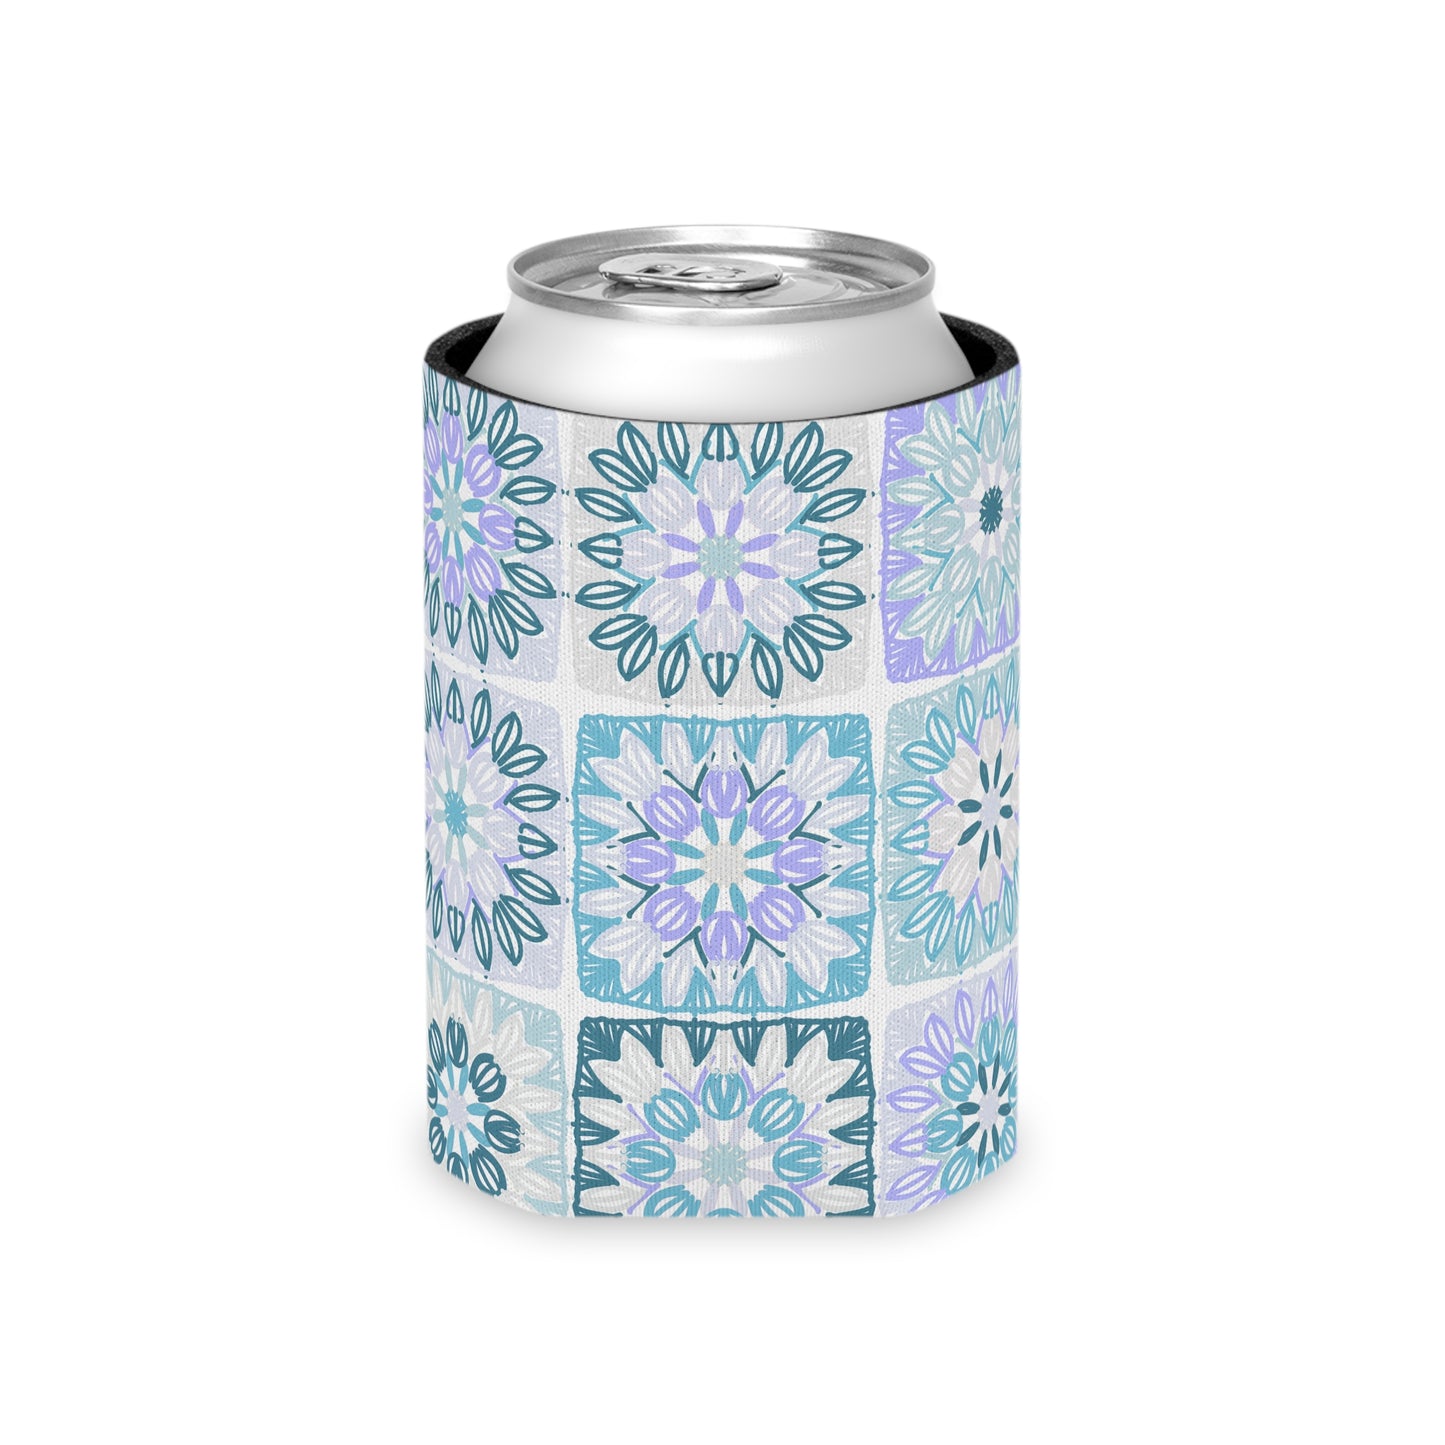 Granny Square in Blueberry Milk | Can Cooler | Crochet | Yarn | Knit | Craft